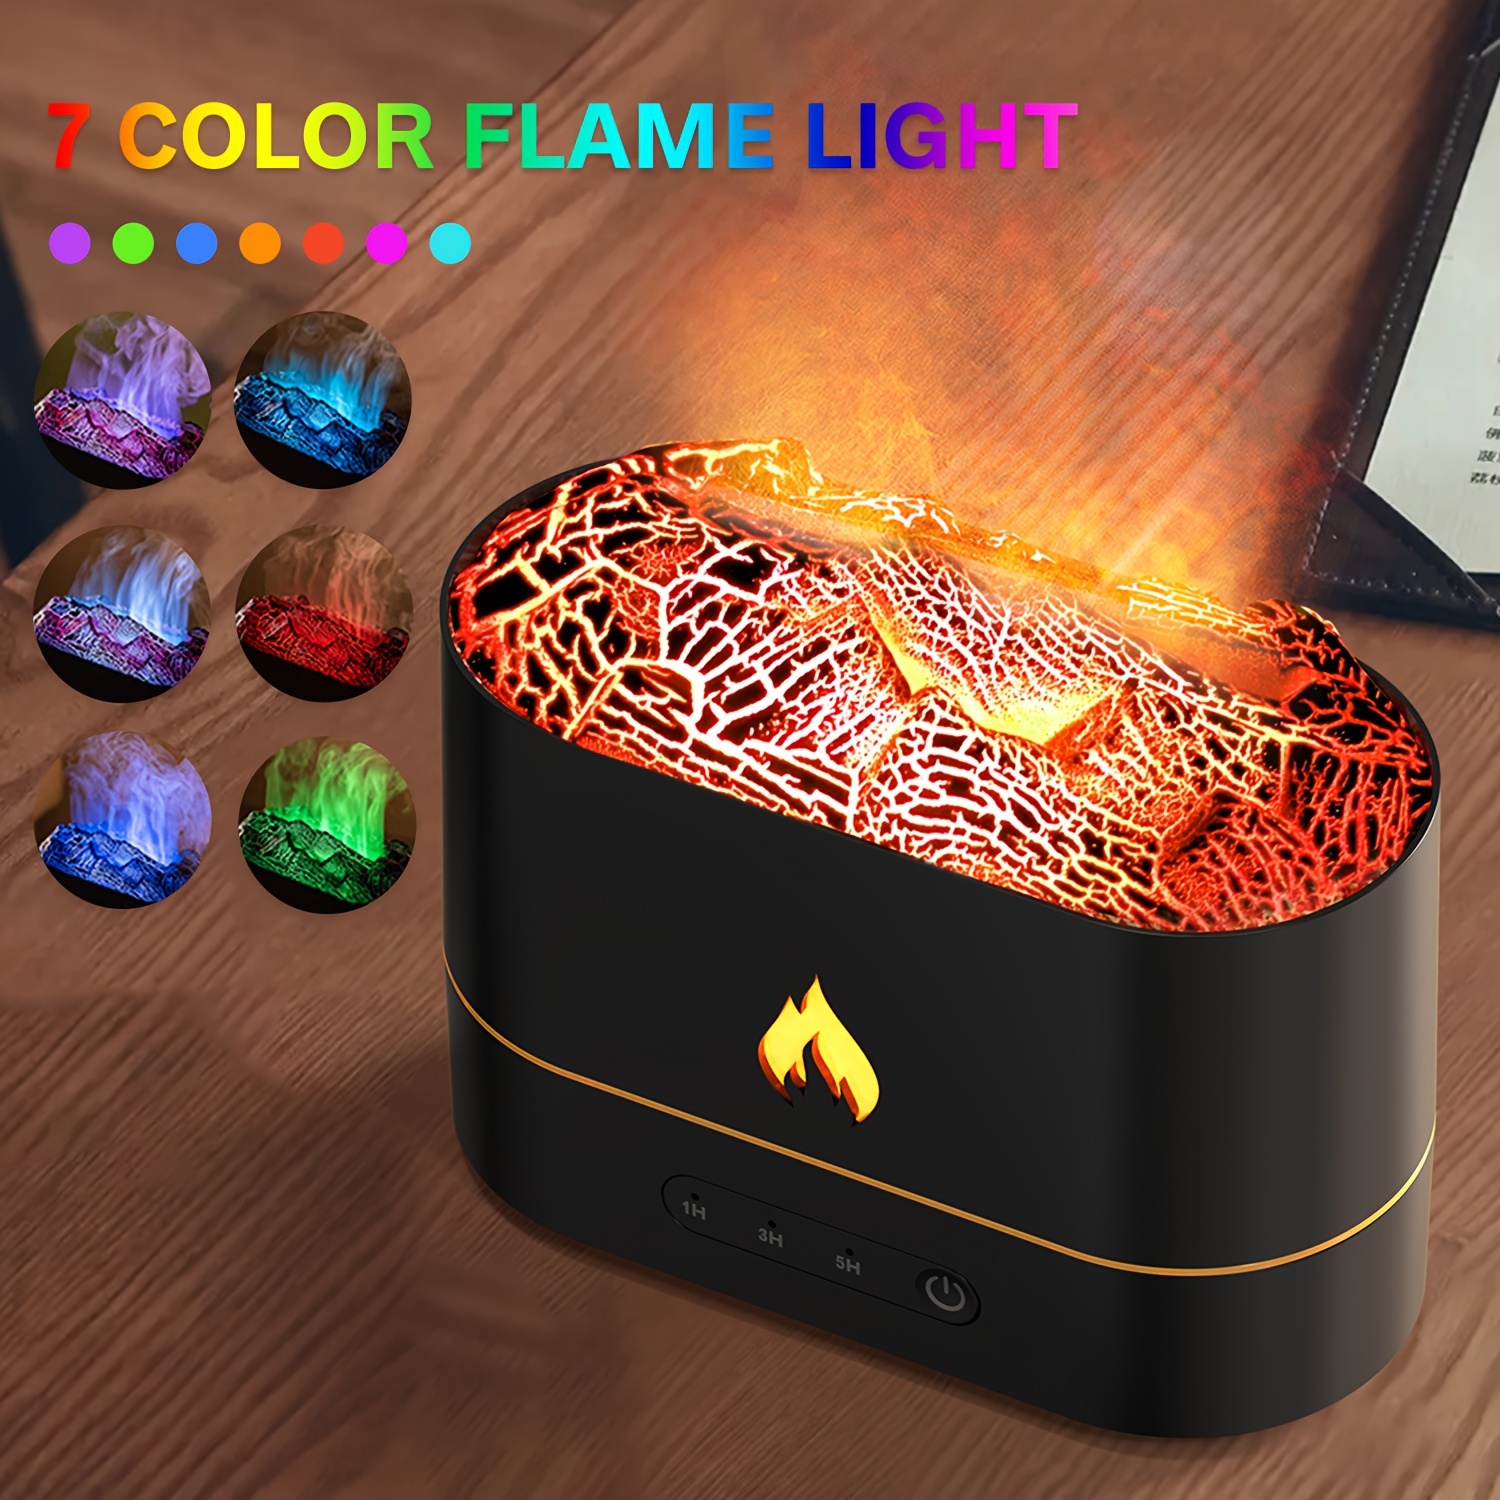 

Burning Lava Lamp, Aromatherapy Diffuser, With Color Flame Lamp, Usb, Aromatherapy, 250ml Volume Air Humidifier, Aromatherapy Dispenser, Suitable For Bedroom, Study, Living Room.